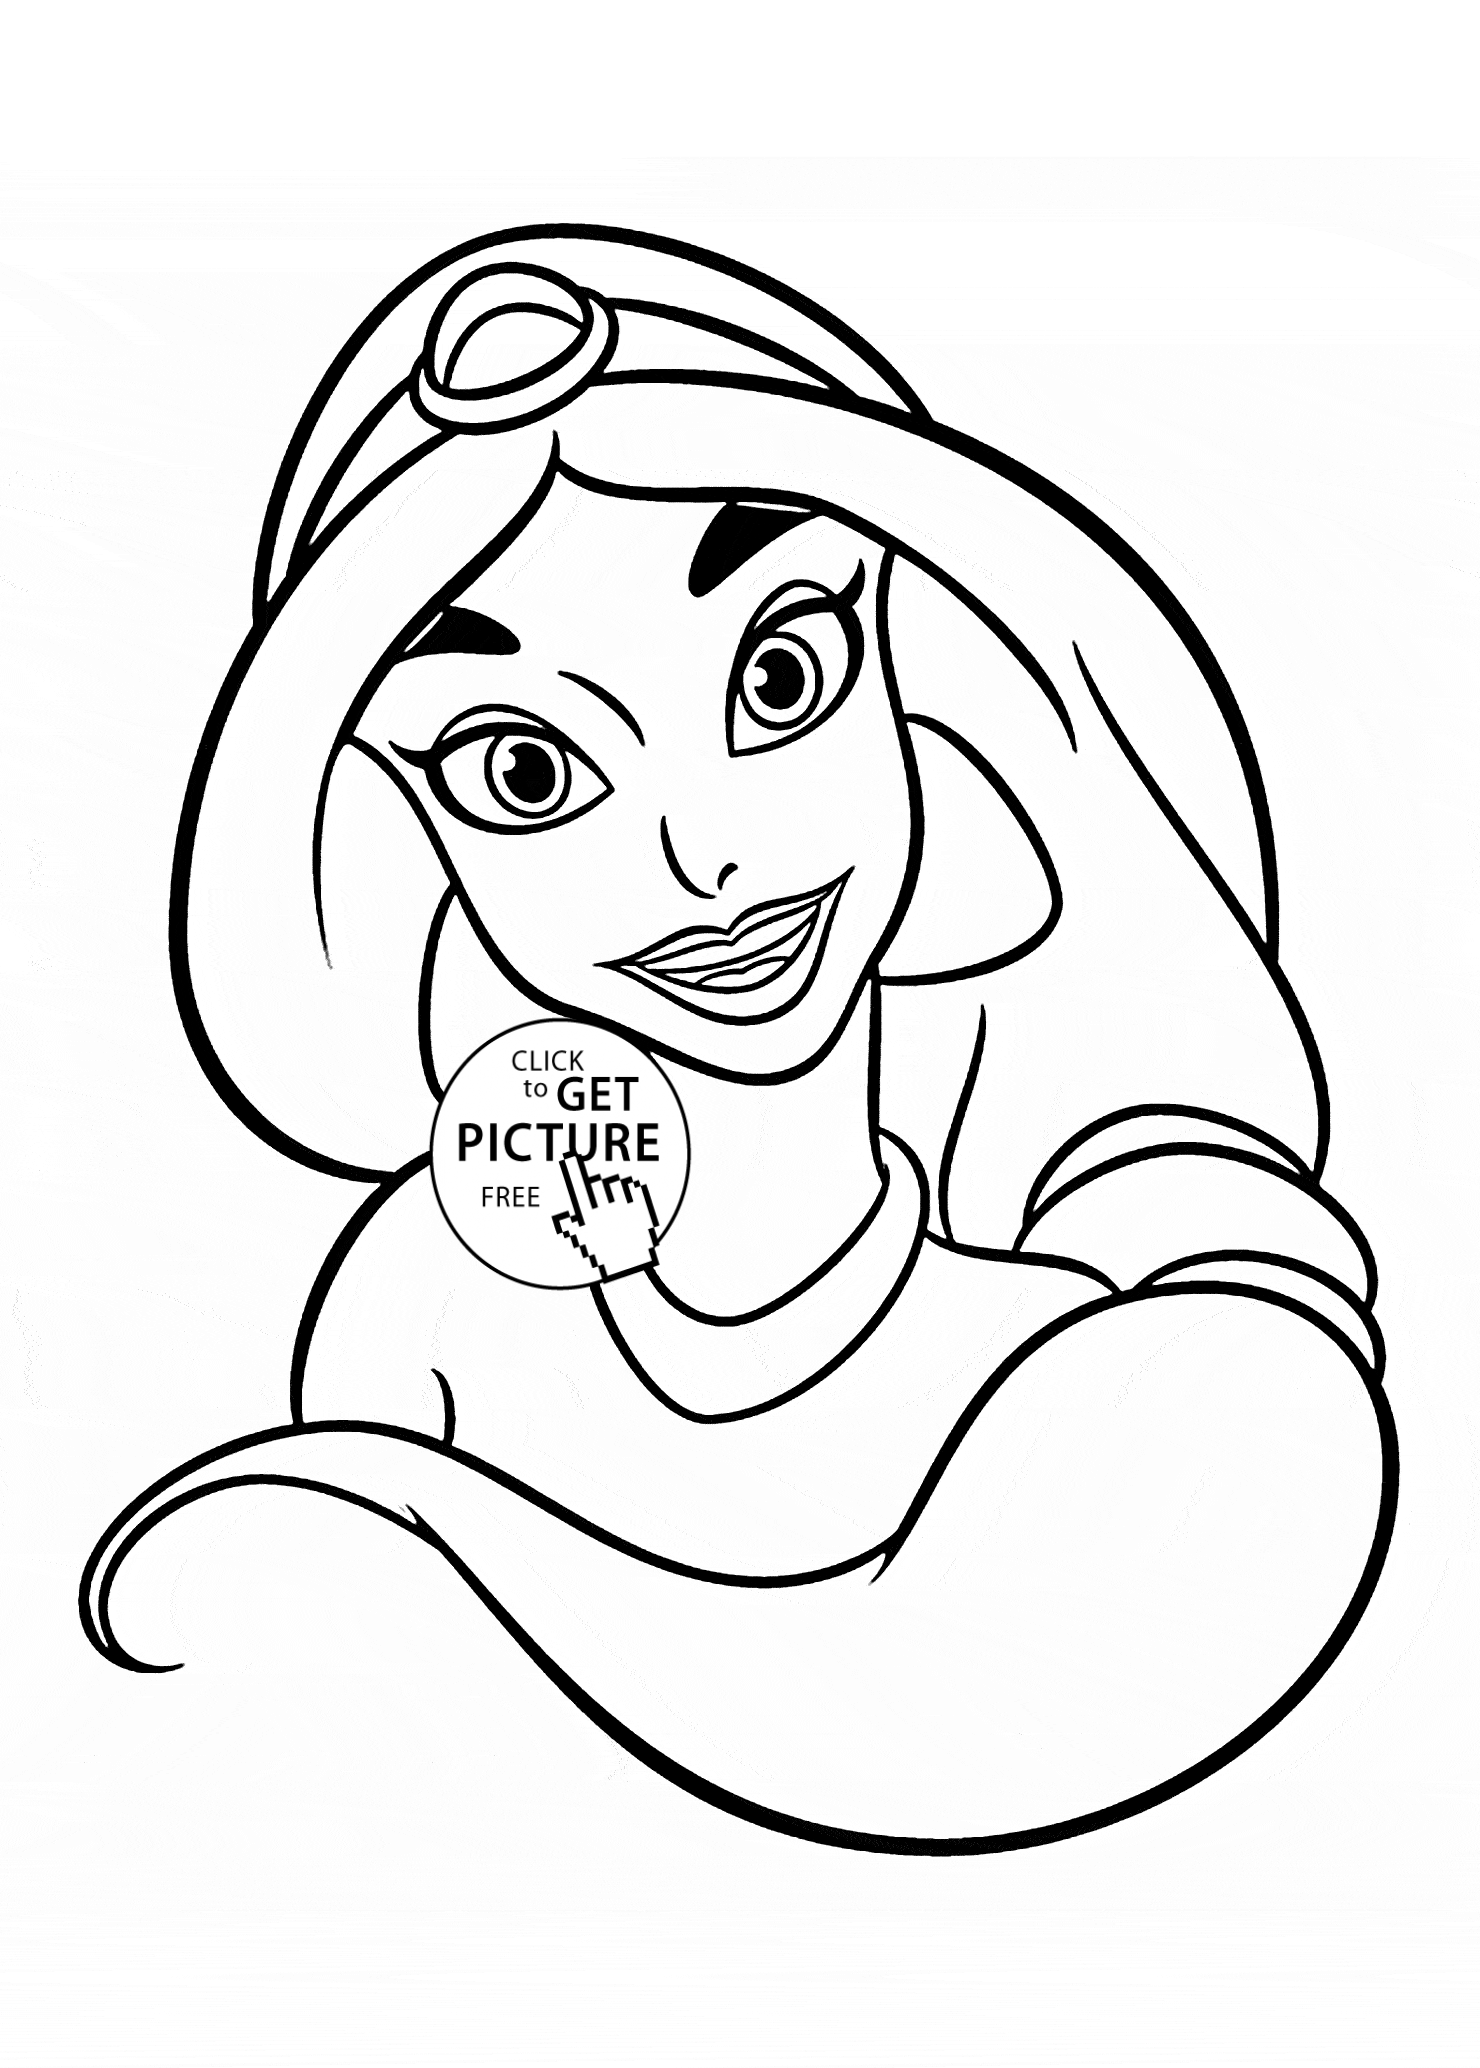 Printable Princess Jasmine Coloring Pages   Coloring Home